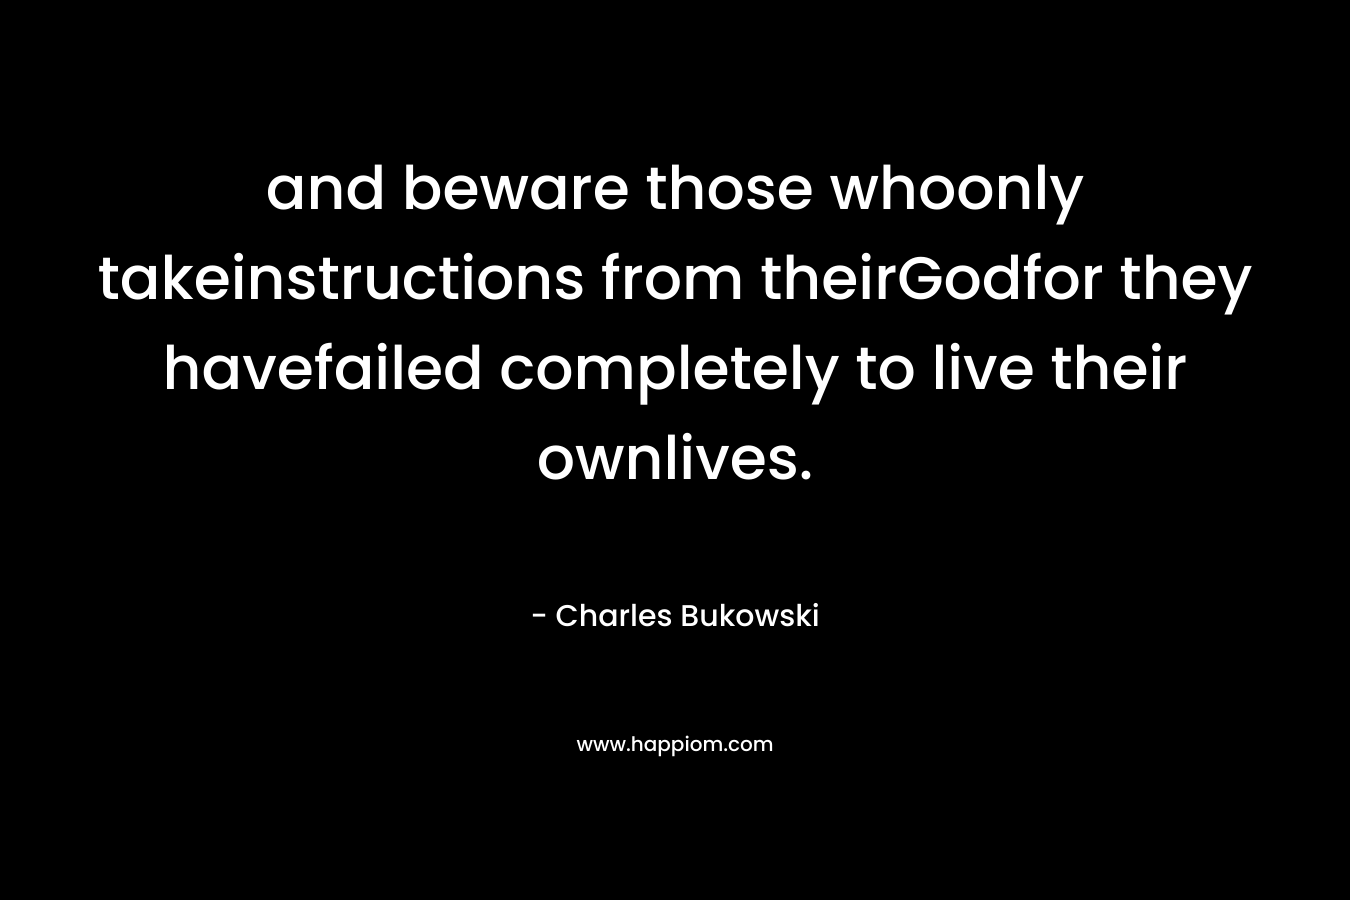 and beware those whoonly takeinstructions from theirGodfor they havefailed completely to live their ownlives. – Charles Bukowski